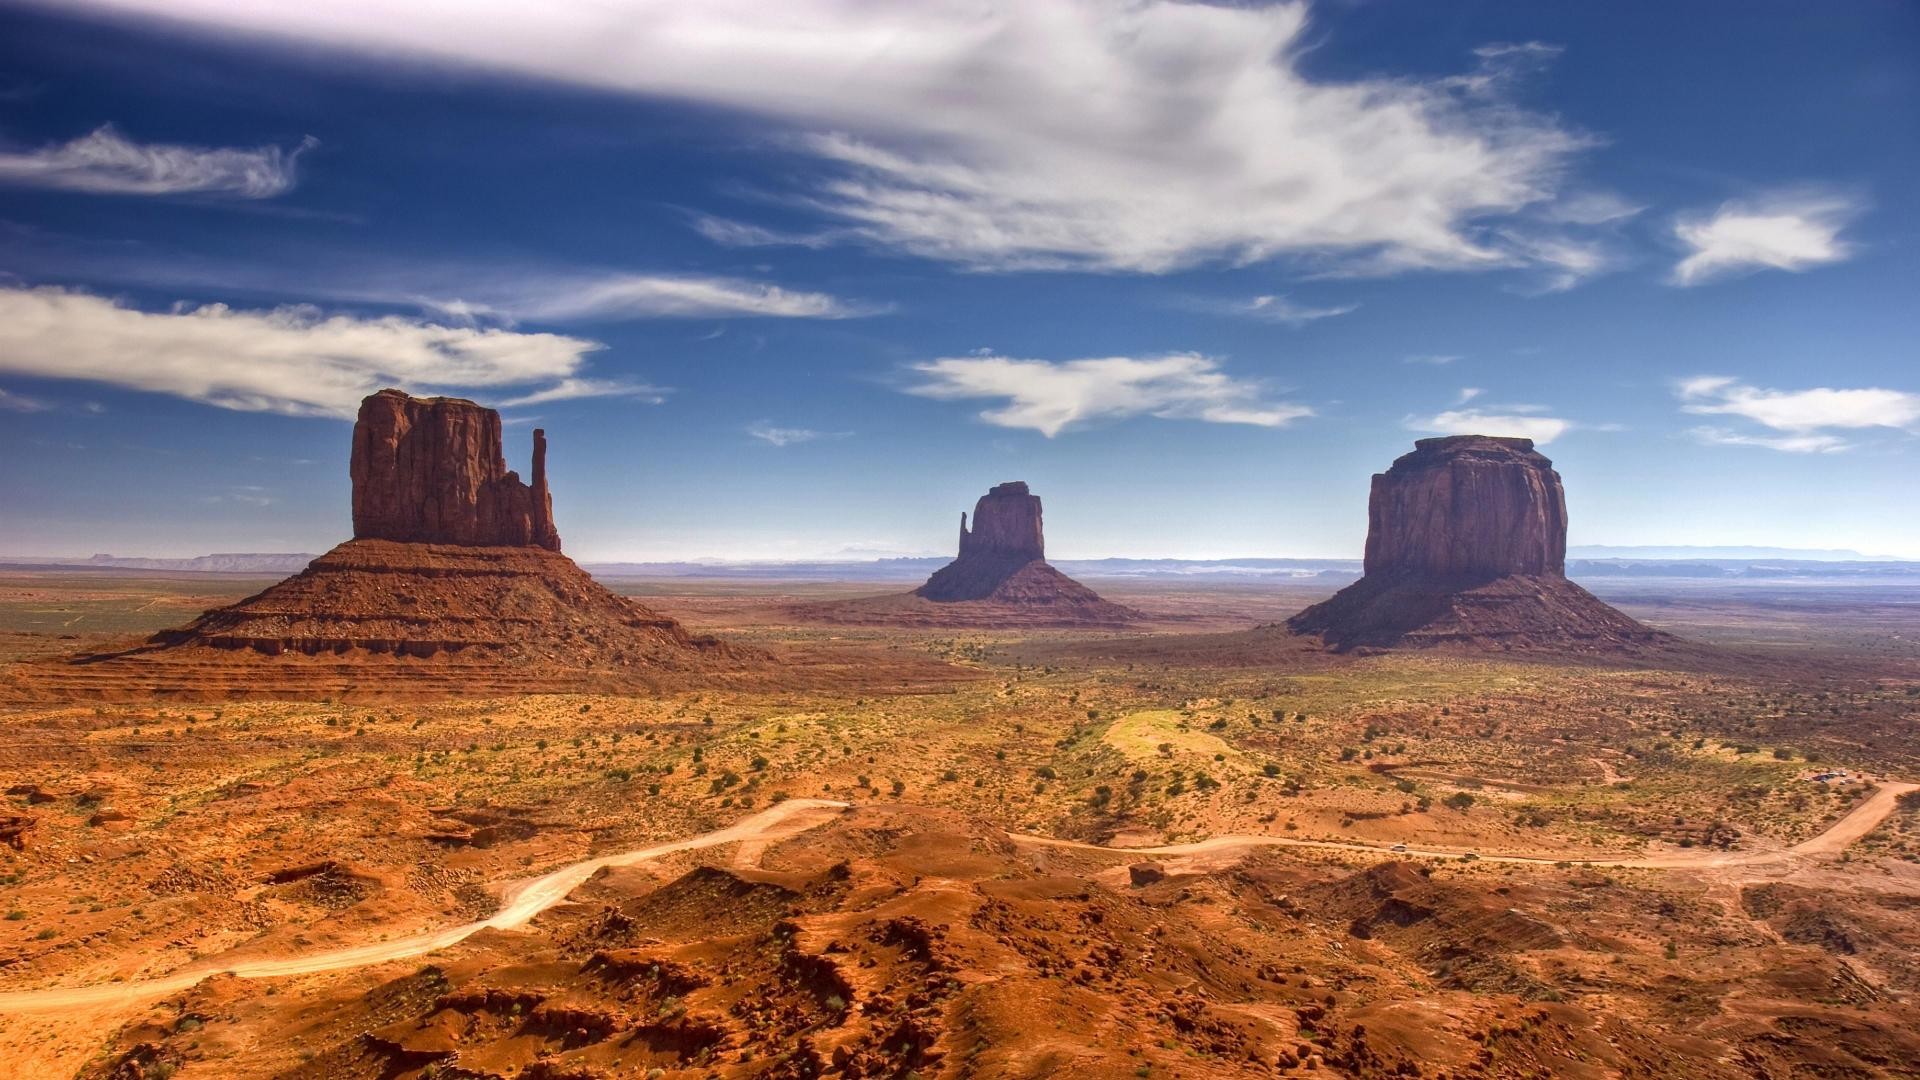 Wallpaper ID 308014  Earth Monument Valley Phone Wallpaper USA Sky  Landscape Nature Desert 1440x3120 free download